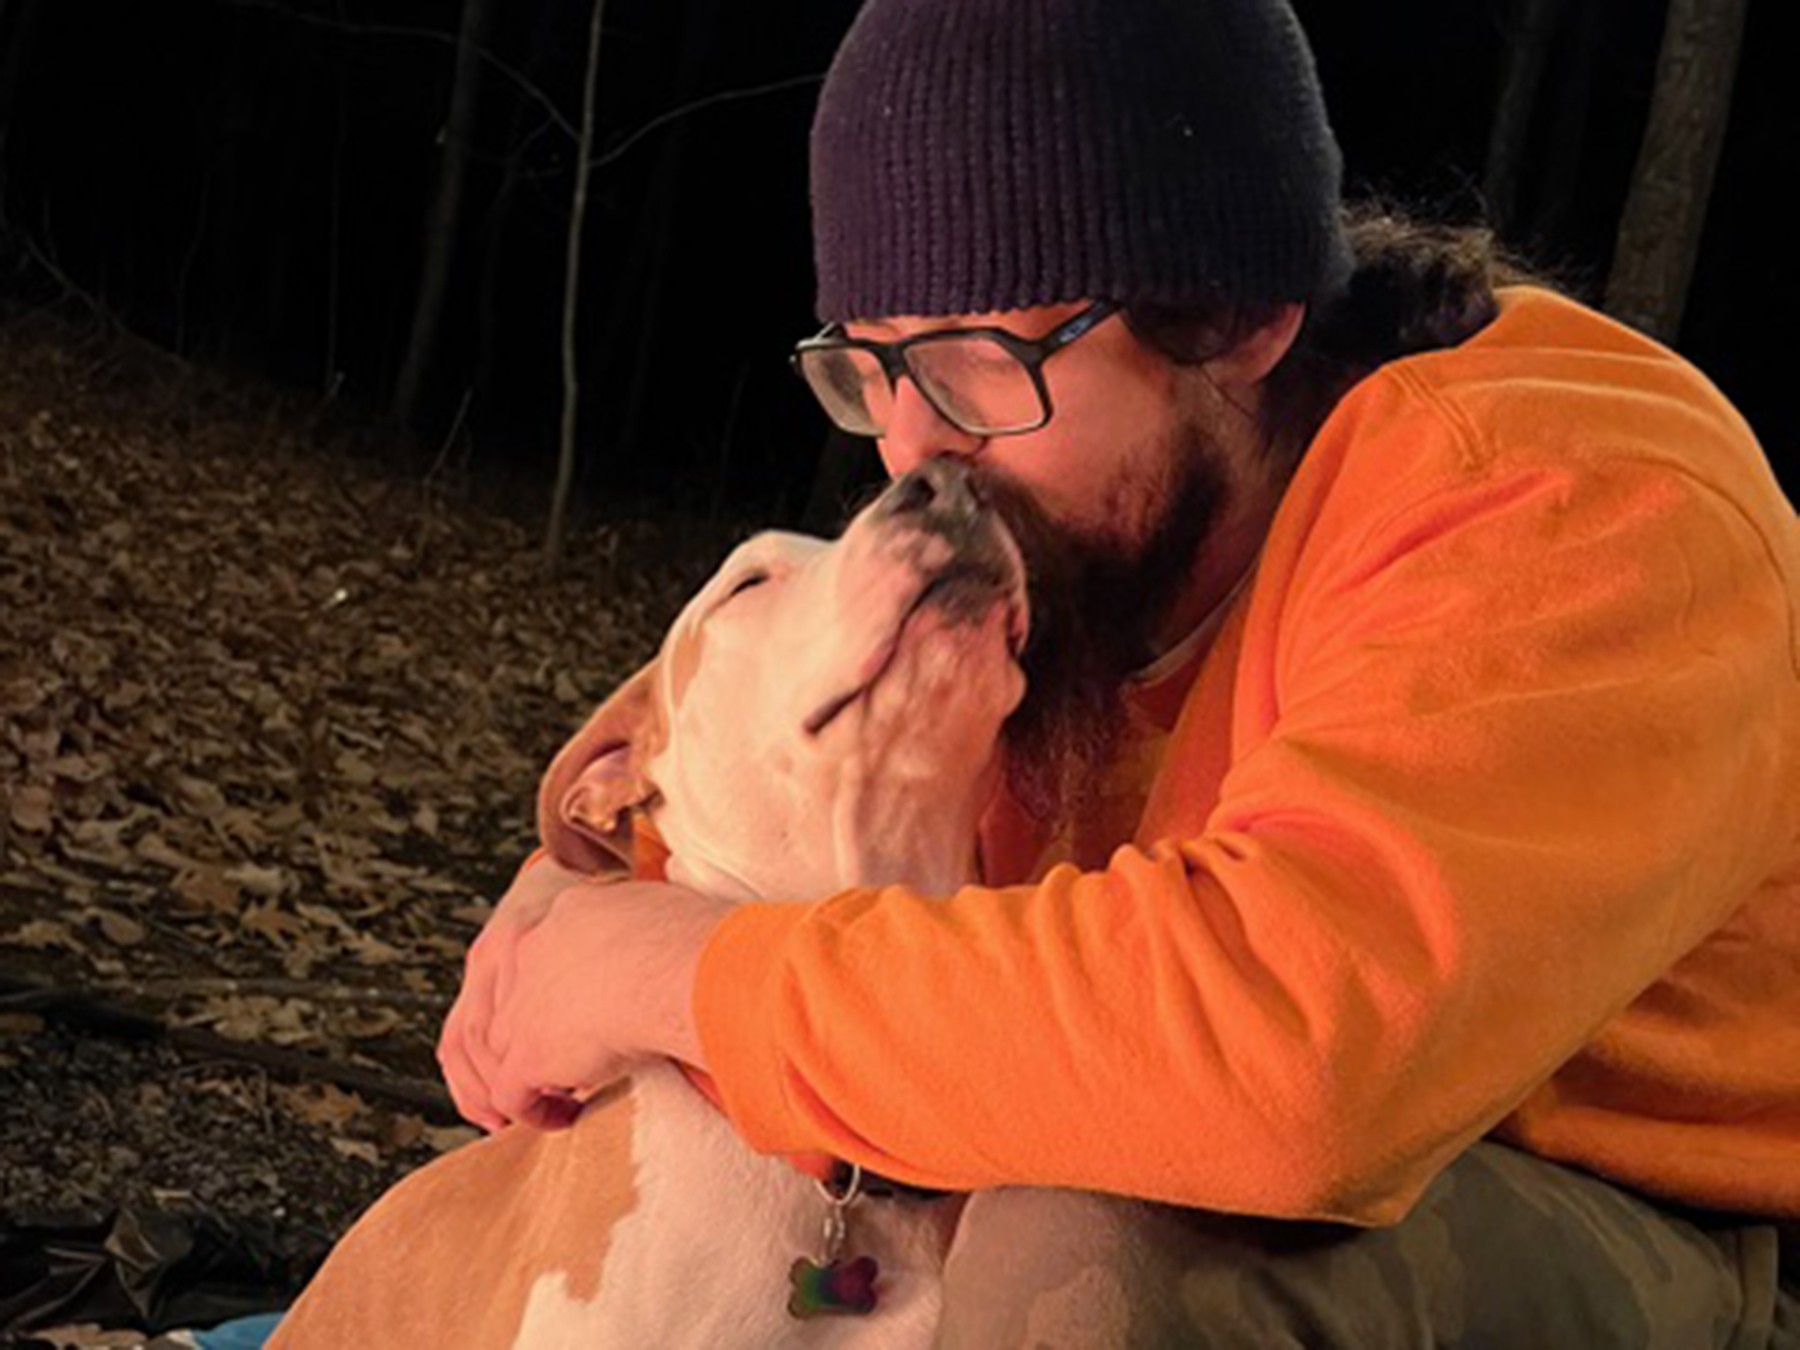 Dylan hugs his dog, Peanut, who was awarded a grant through our Companions in Crisis program to help treat a chondrosarcoma bone tumor that required surgery, radiation, and chemotherapy thanks to the support of Subaru's Share the Love campaign.